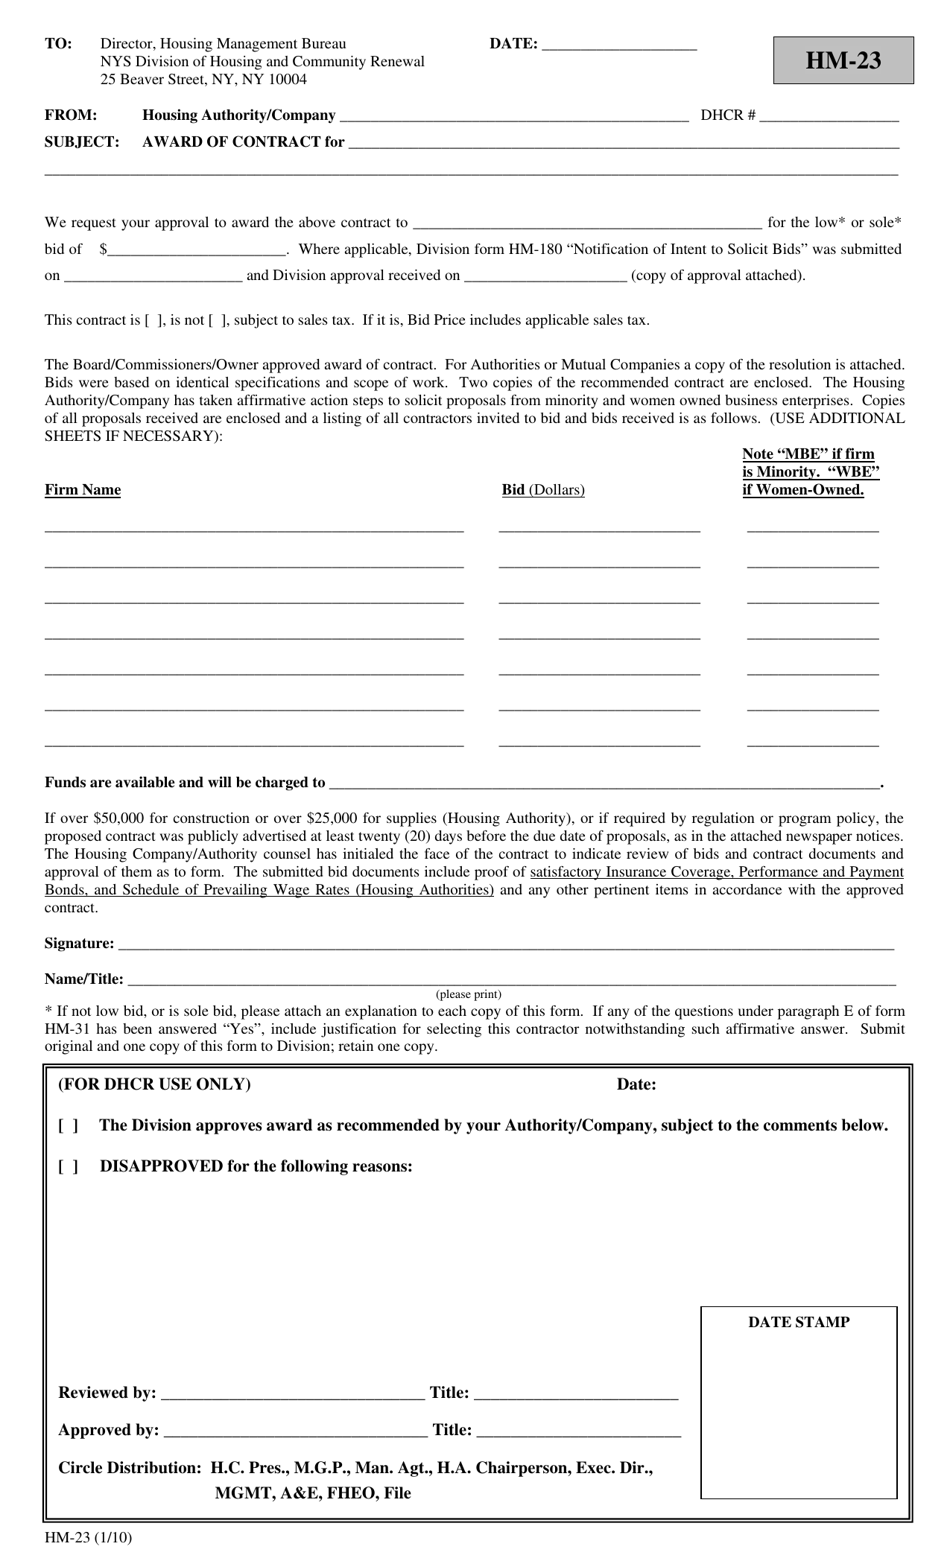 Form HM-23 Award of Contract - New York, Page 1